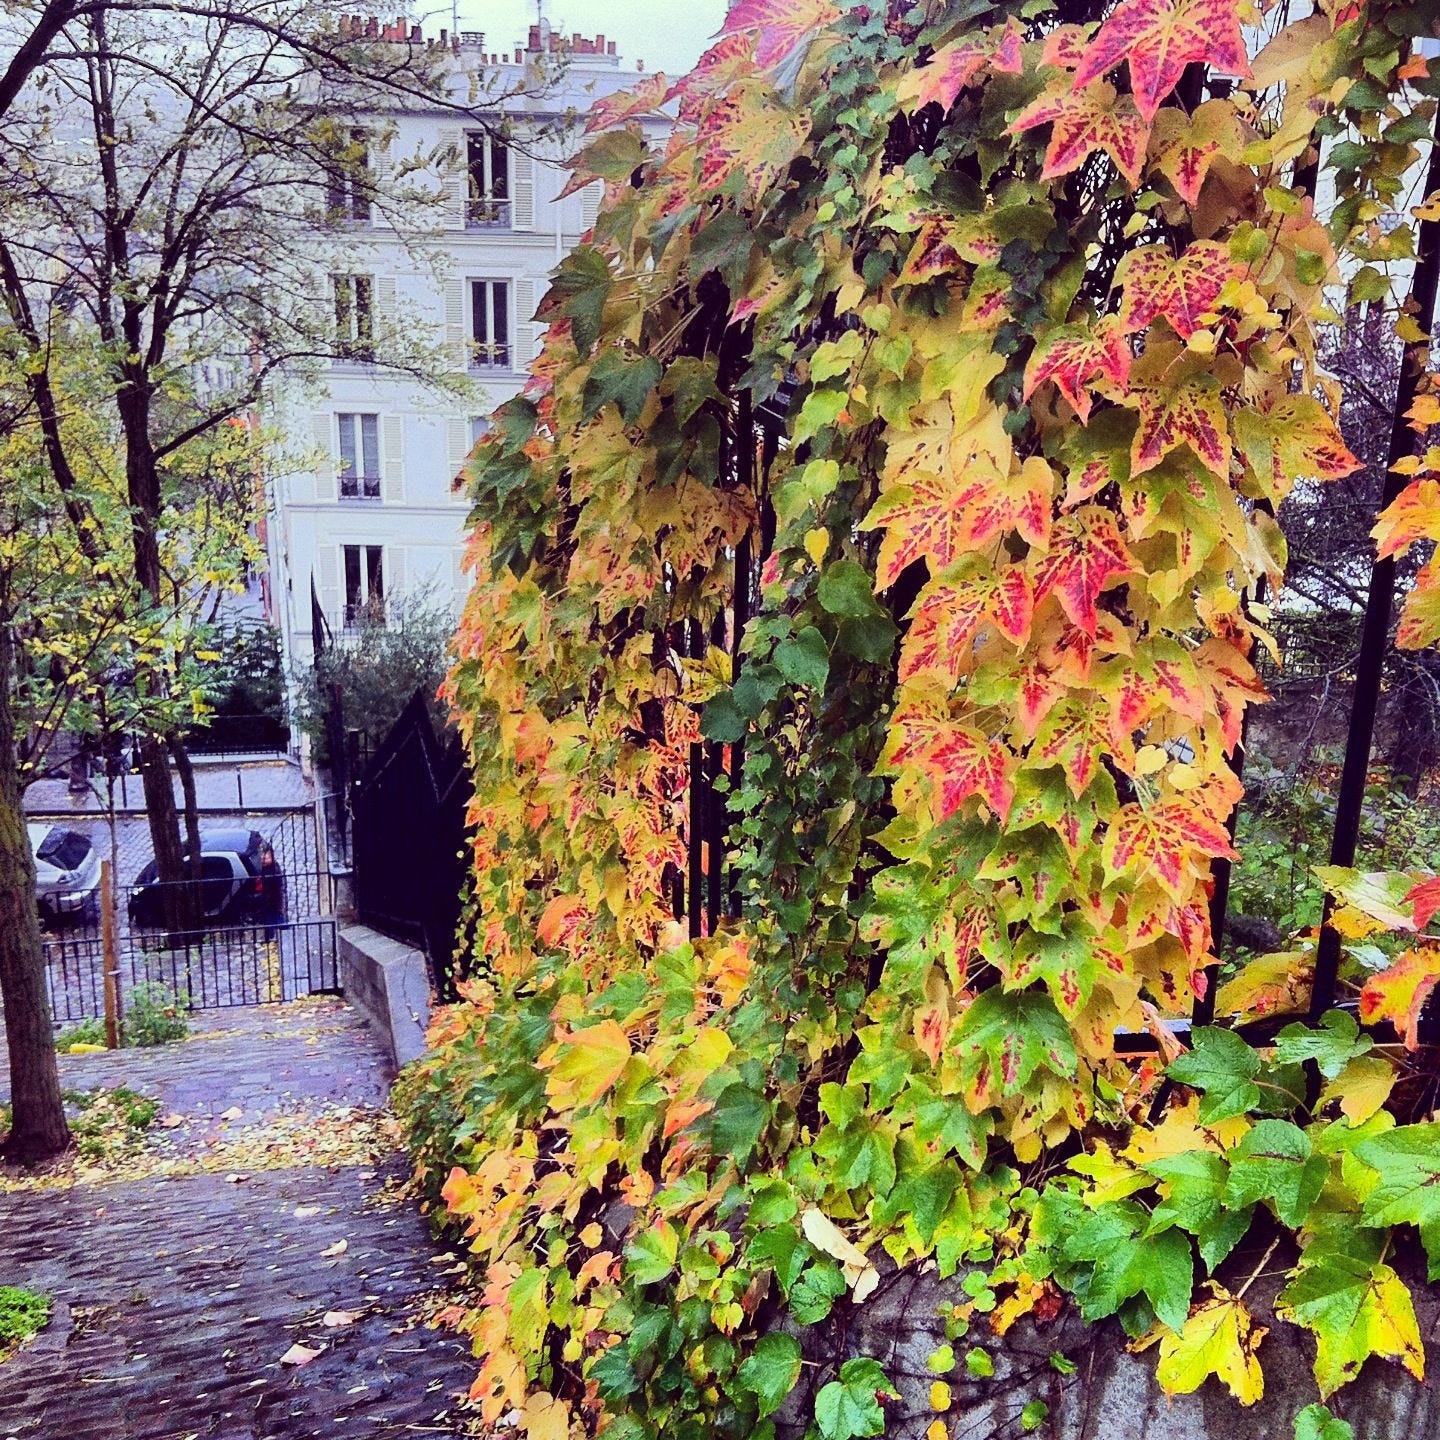 Fall into Automne, Yogateau newsletter about yoga in Paris